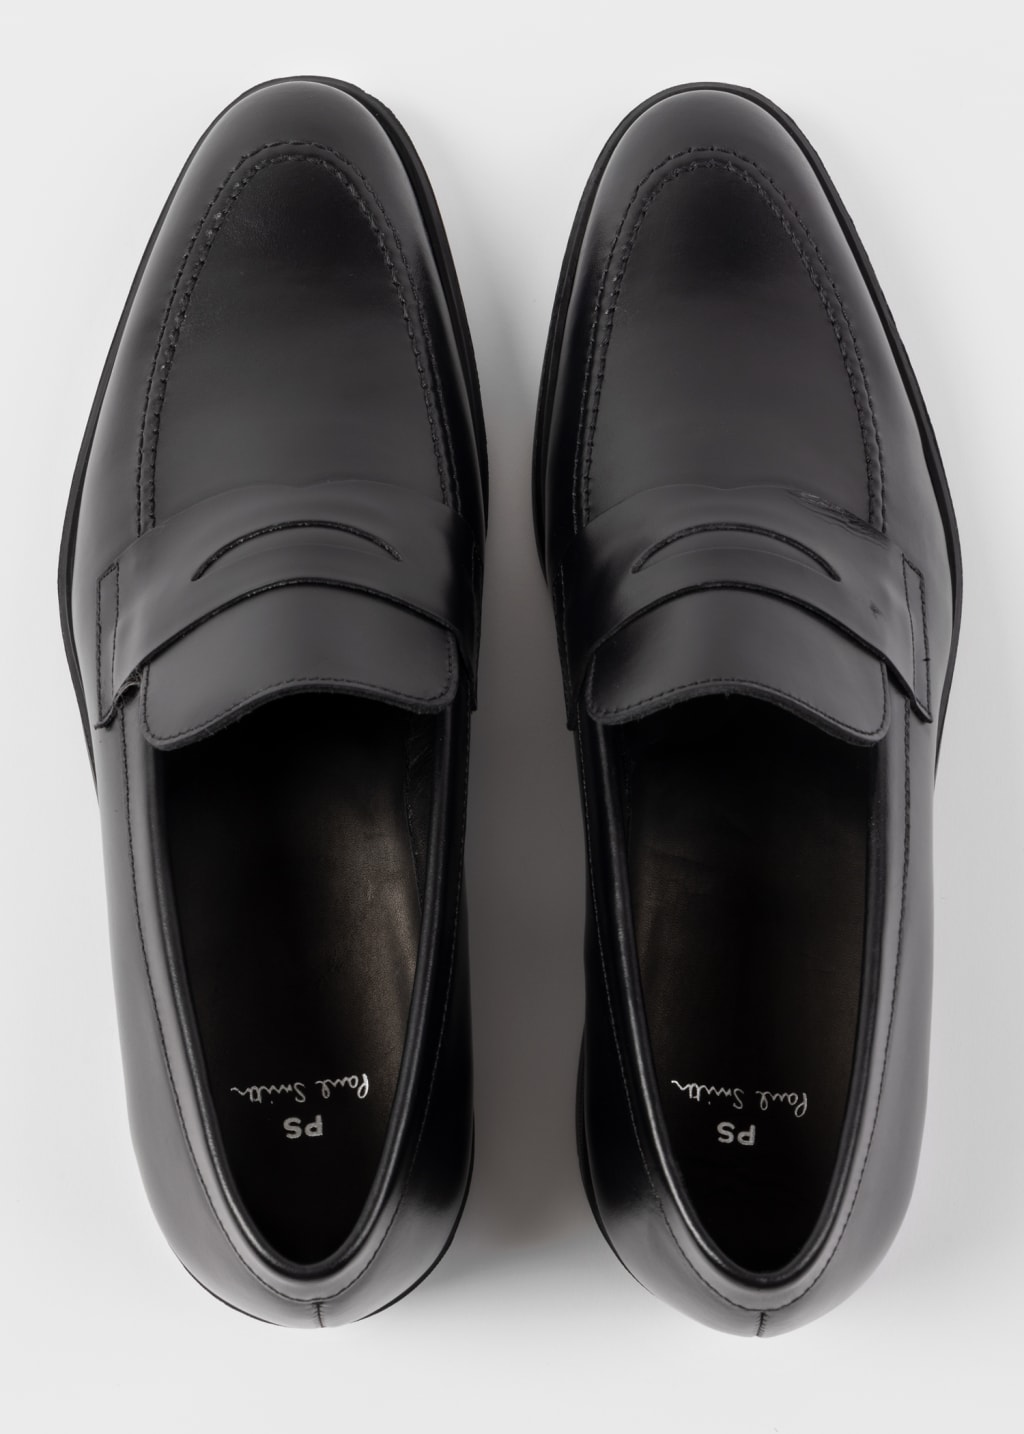 Pair View - Black Leather 'Remi' Loafers Paul Smith